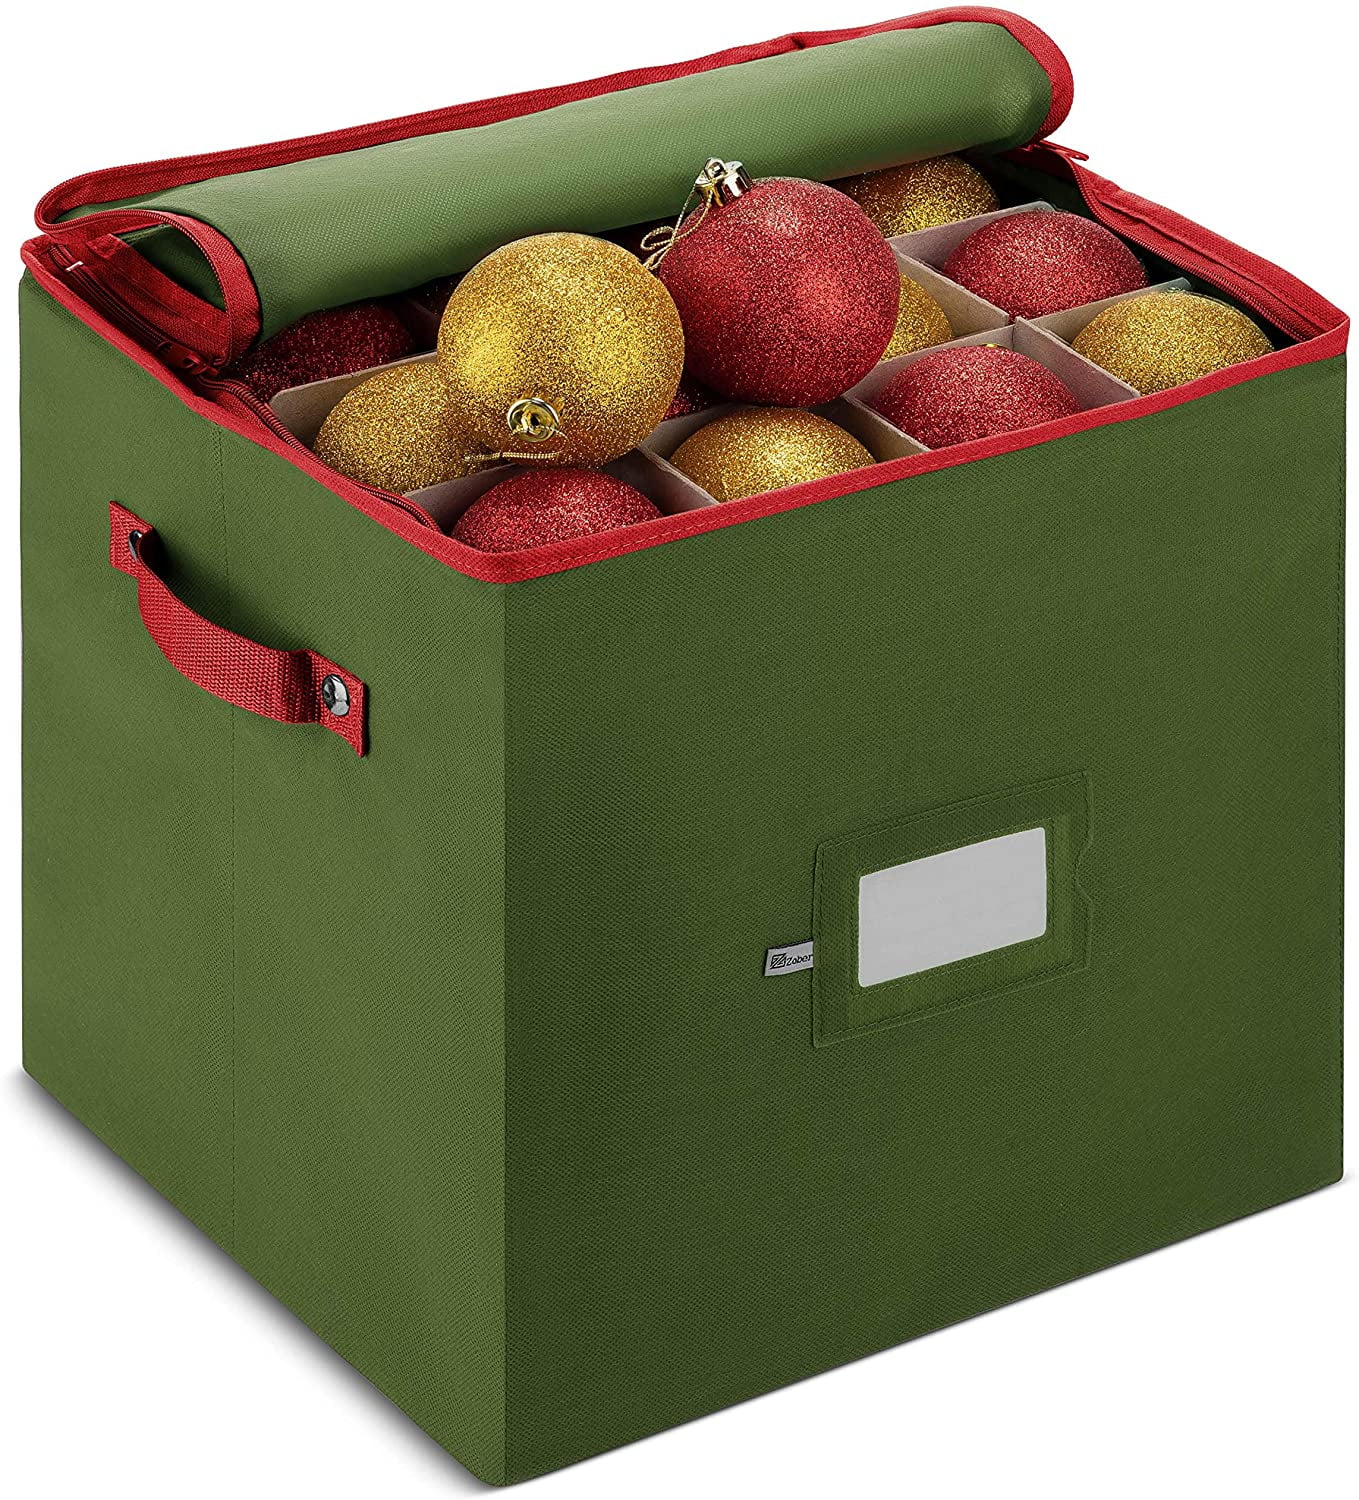 Patiobay Christmas Ornament Storage Box - Stores Up to 128 Holiday  Ornaments, Christmas Storage Container with Side Pocket, Adjustable  Dividers, Card